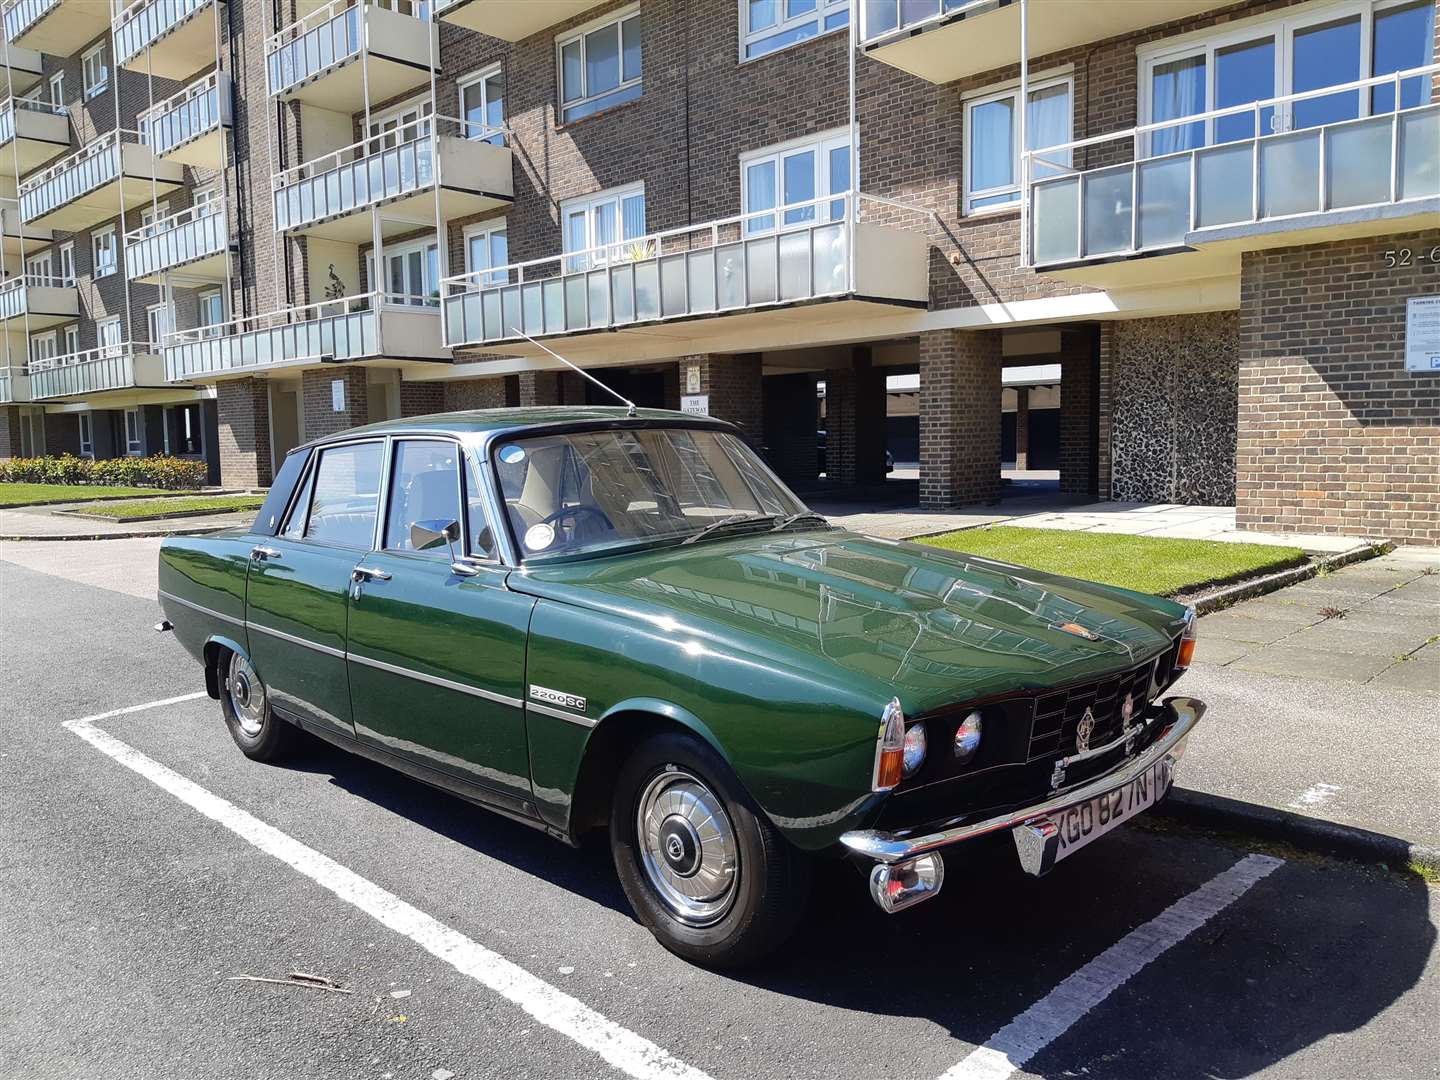 The 1974 Rover, straight from the Pistols' era. Picture: Sam Lennon